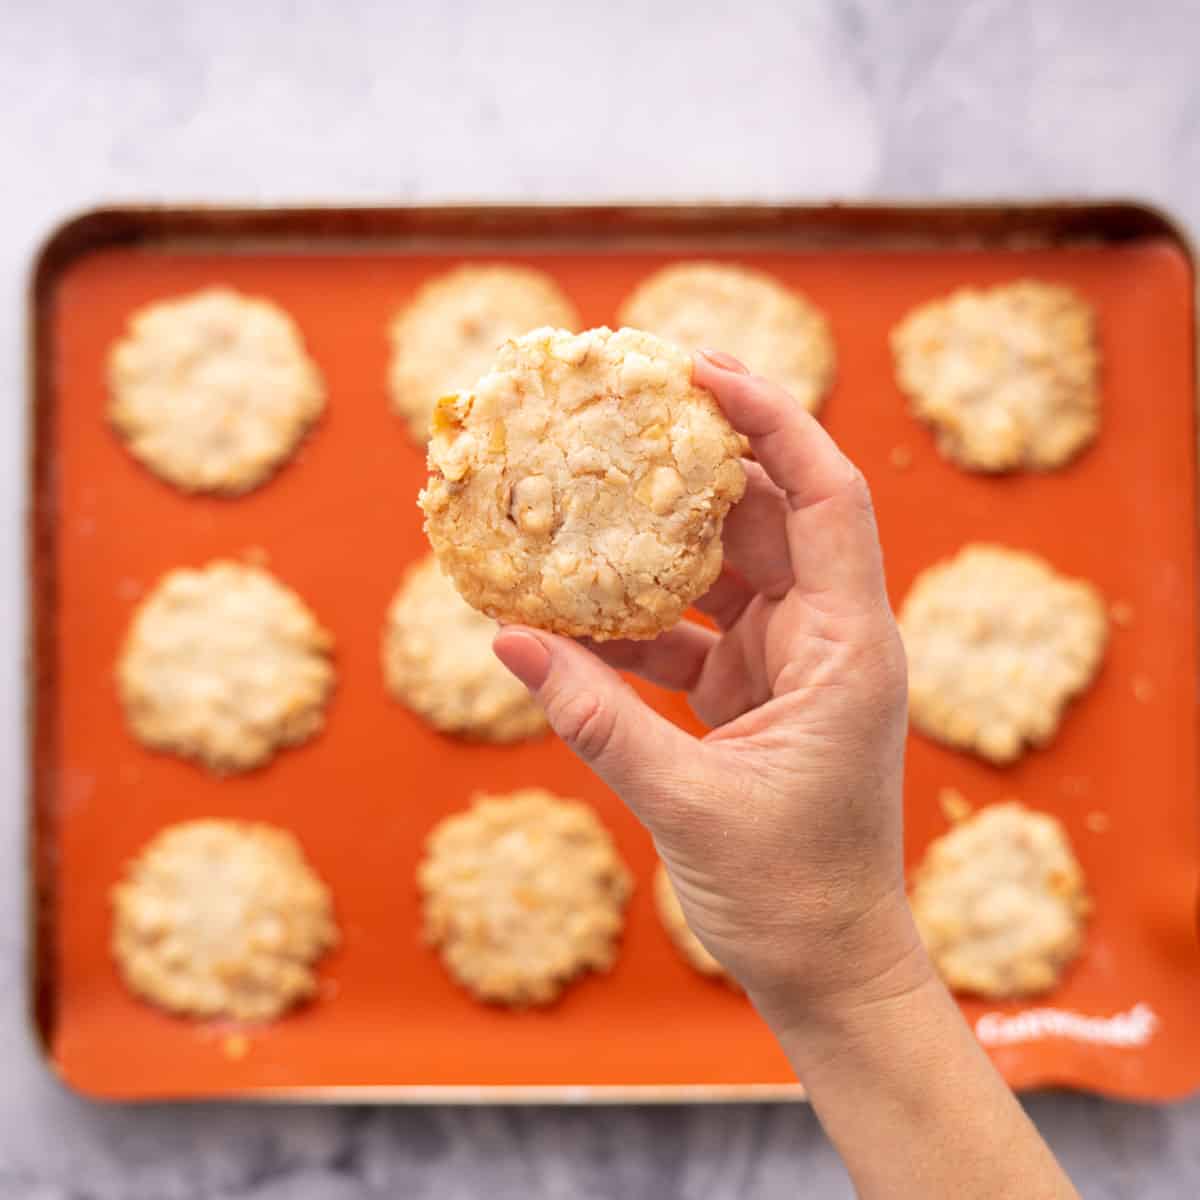 Lined tray with 12 baked golden brown Gluten Free Coconut Cookies and a hand holding 1 cookie